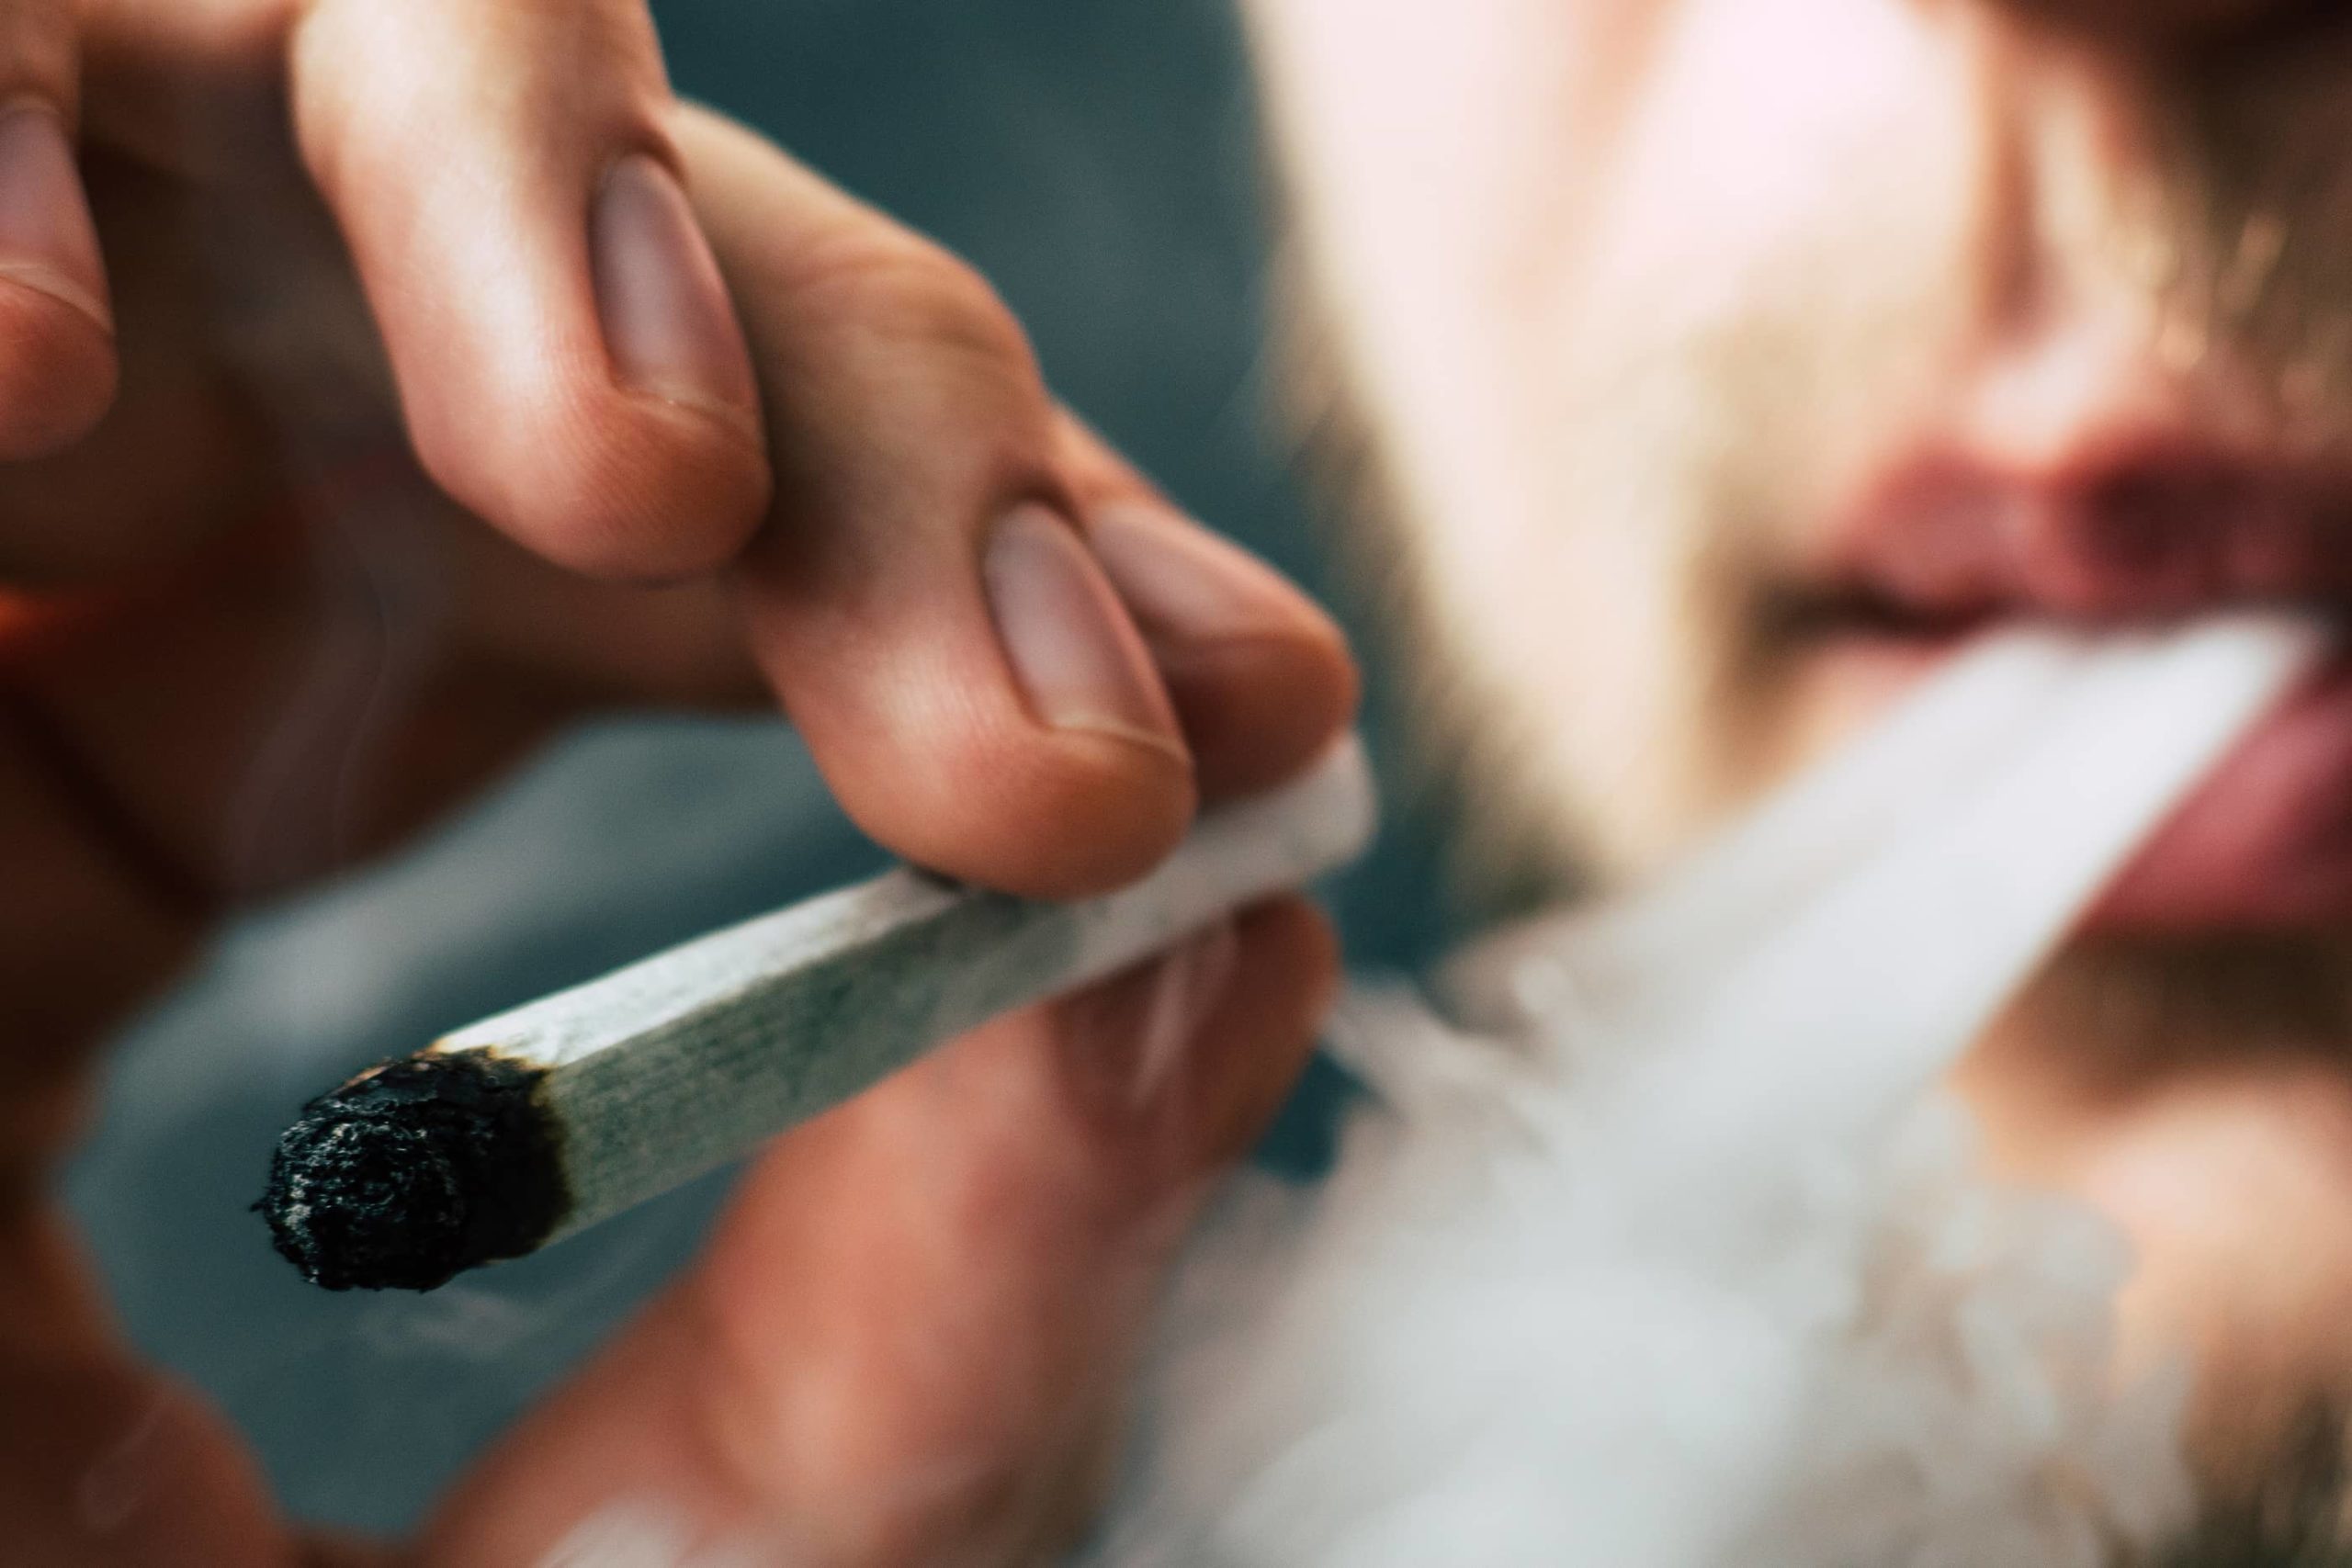 Police in California Struggling to Determine if People are Driving Stoned